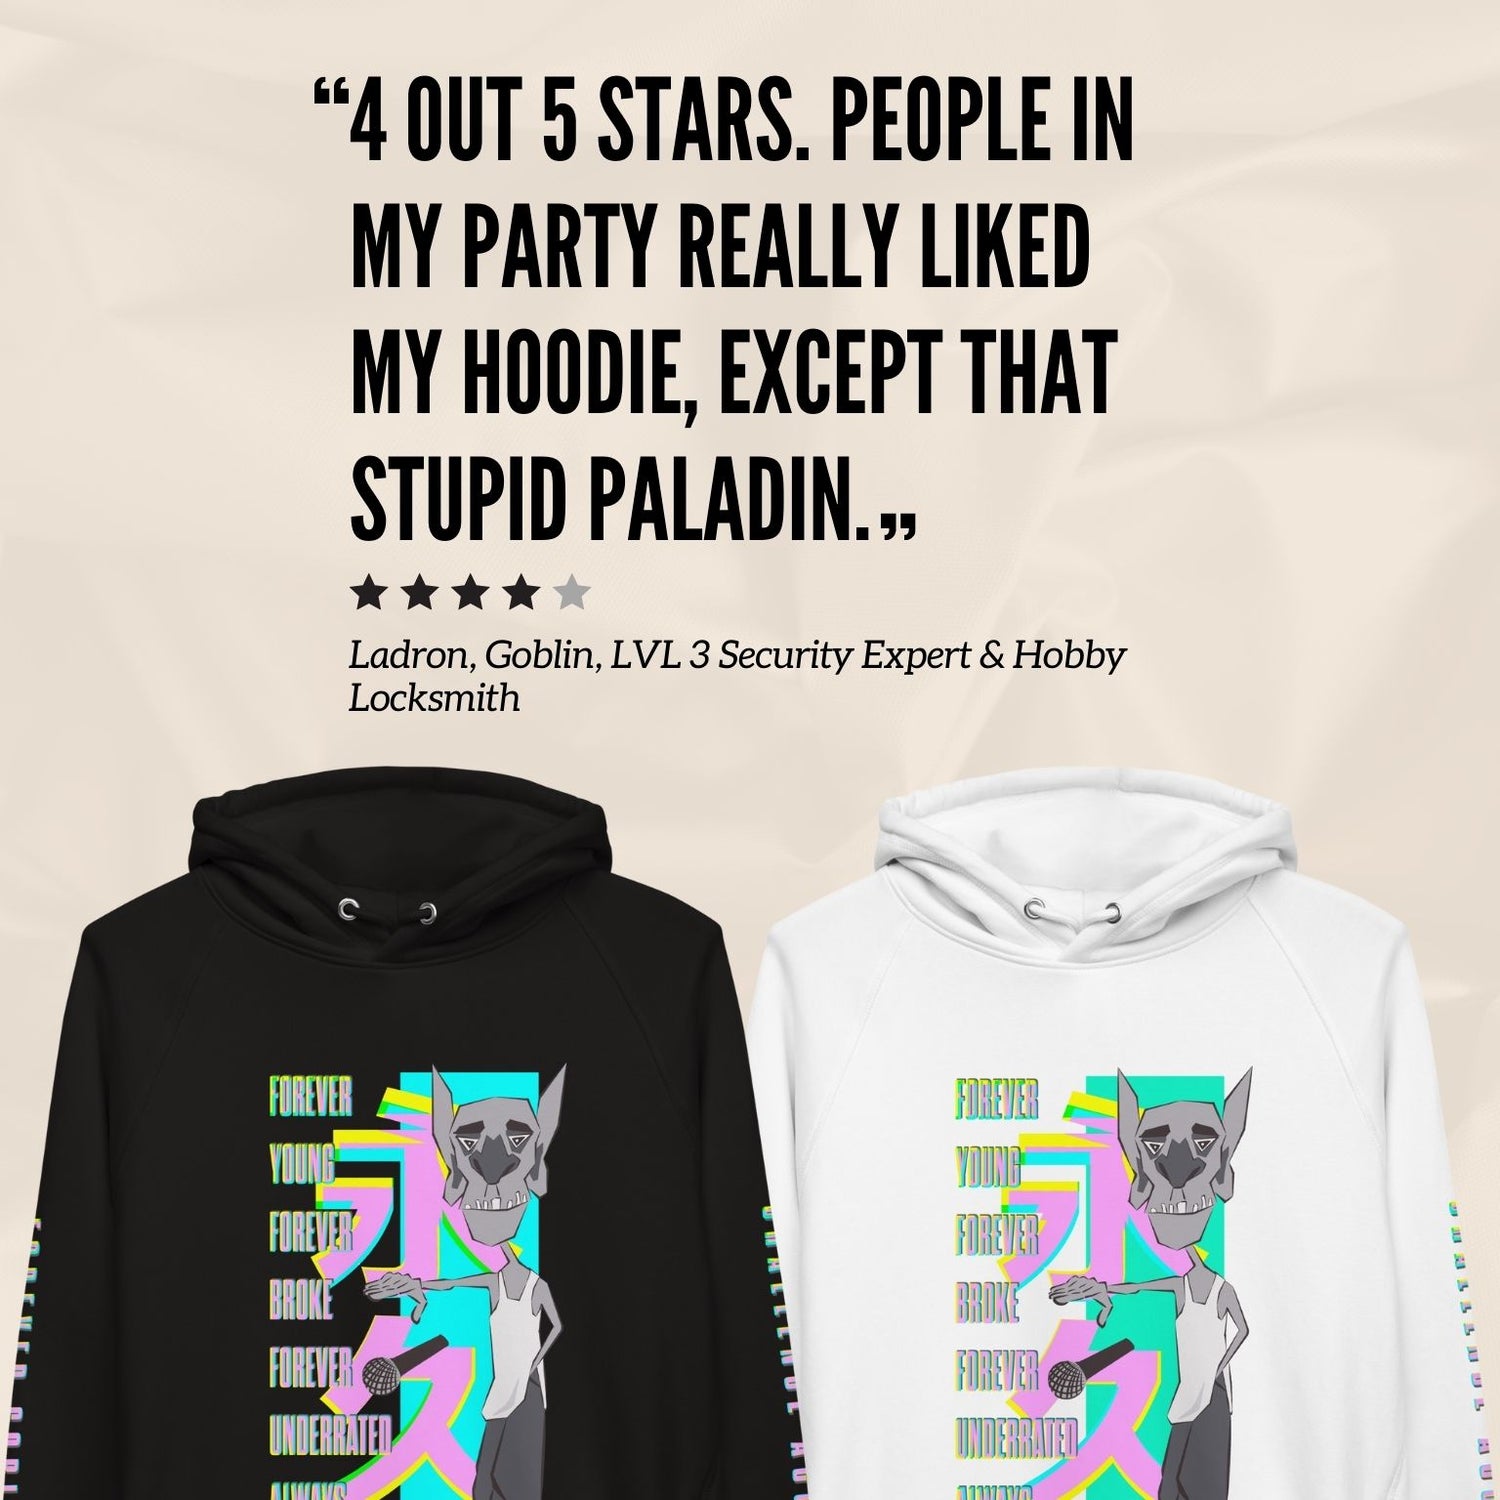 "4 out 5 Stars. people in my party really liked my hoodie, except that stupid paladin." - Ladron, Goblin, LVL 3 Security Expert & Hobby Locksmith